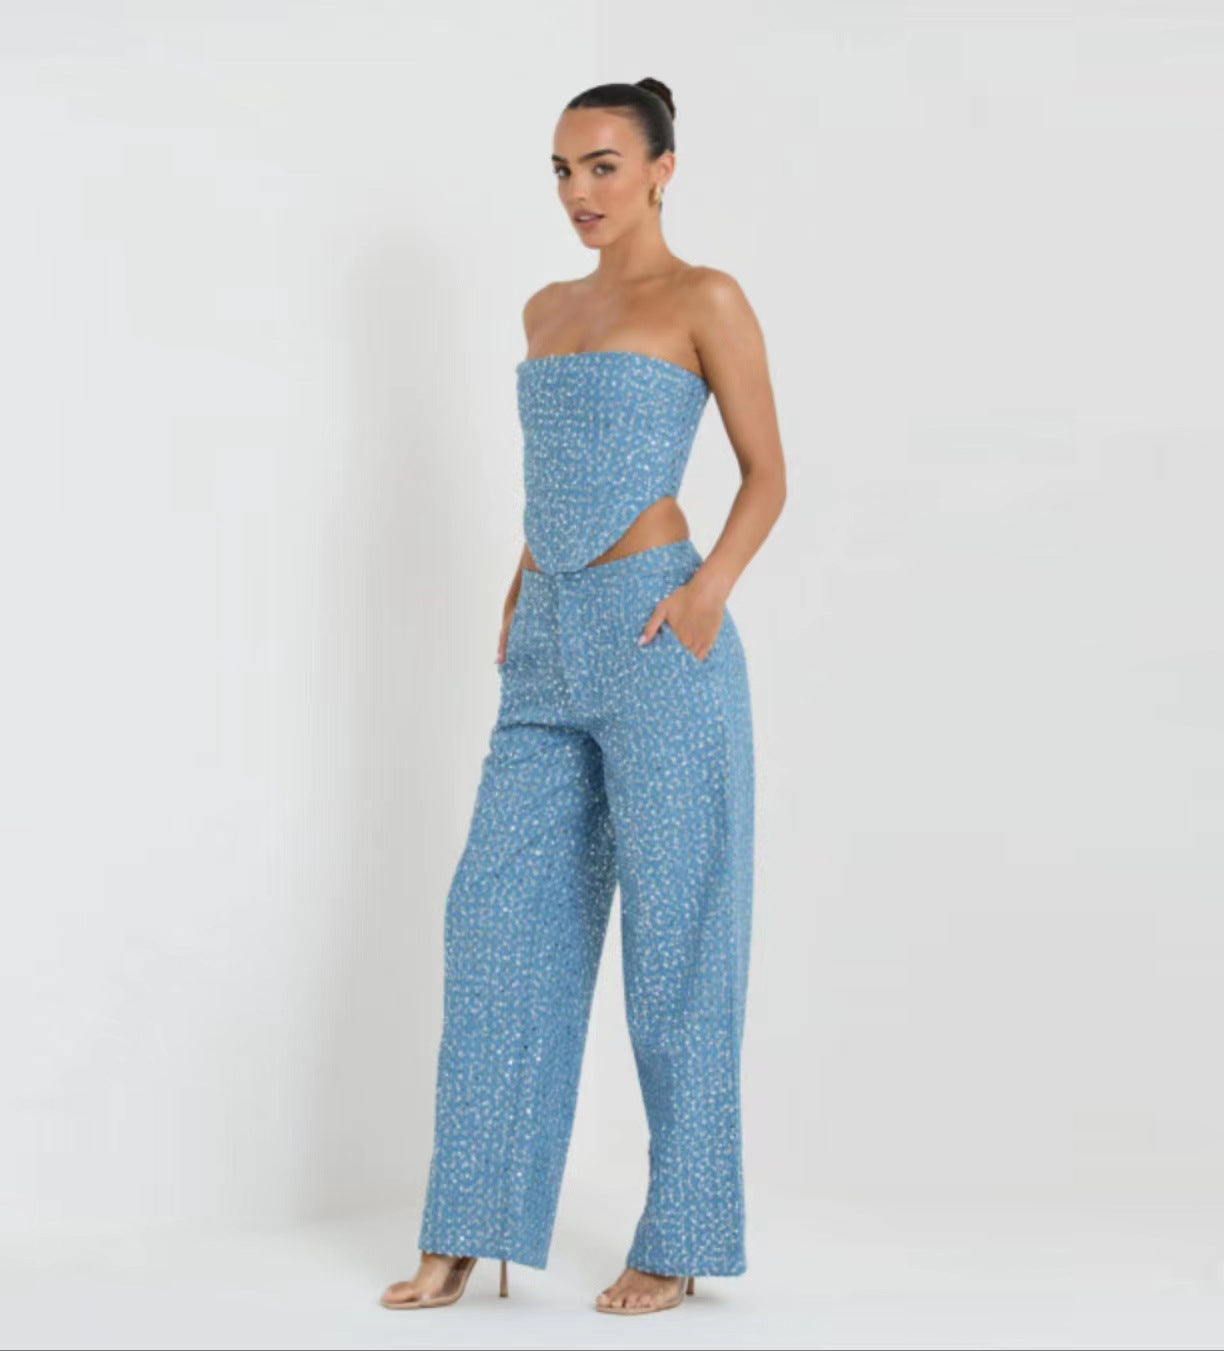 Denim Sequined Tube Top Wide Leg Pants Outfit Set